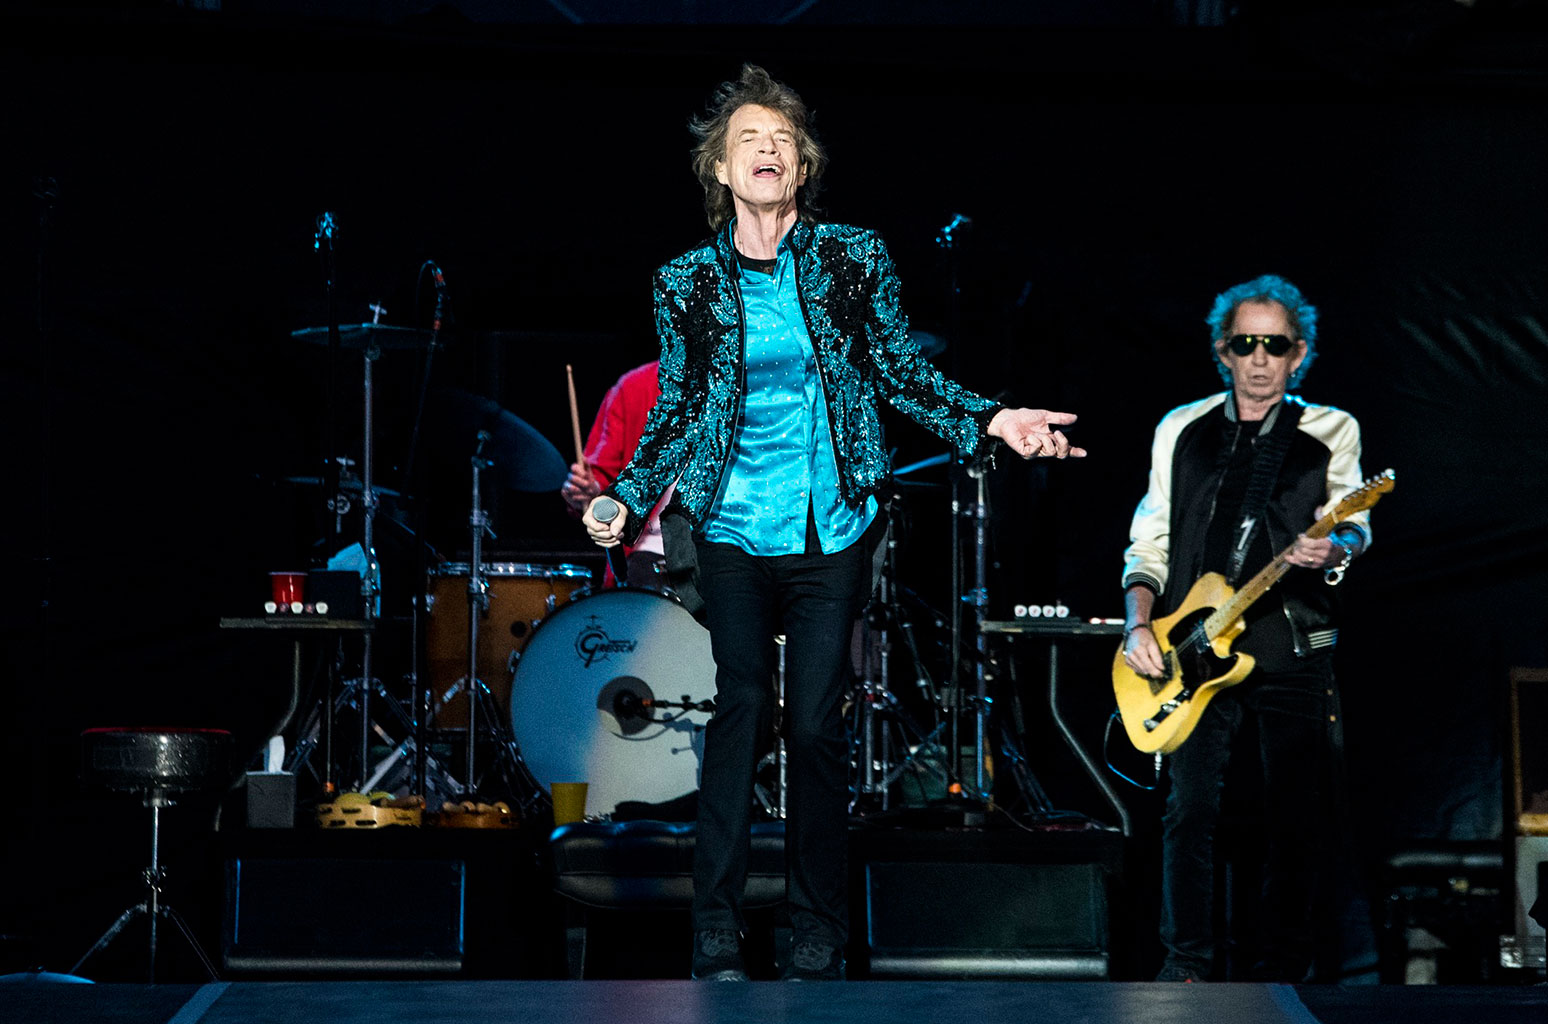 You are currently viewing The Rolling Stones Bring Their No Filter Tour to Toronto Ontario, Canada Burl’s Creek [SETLIST/PHOTOS/VIDEO]